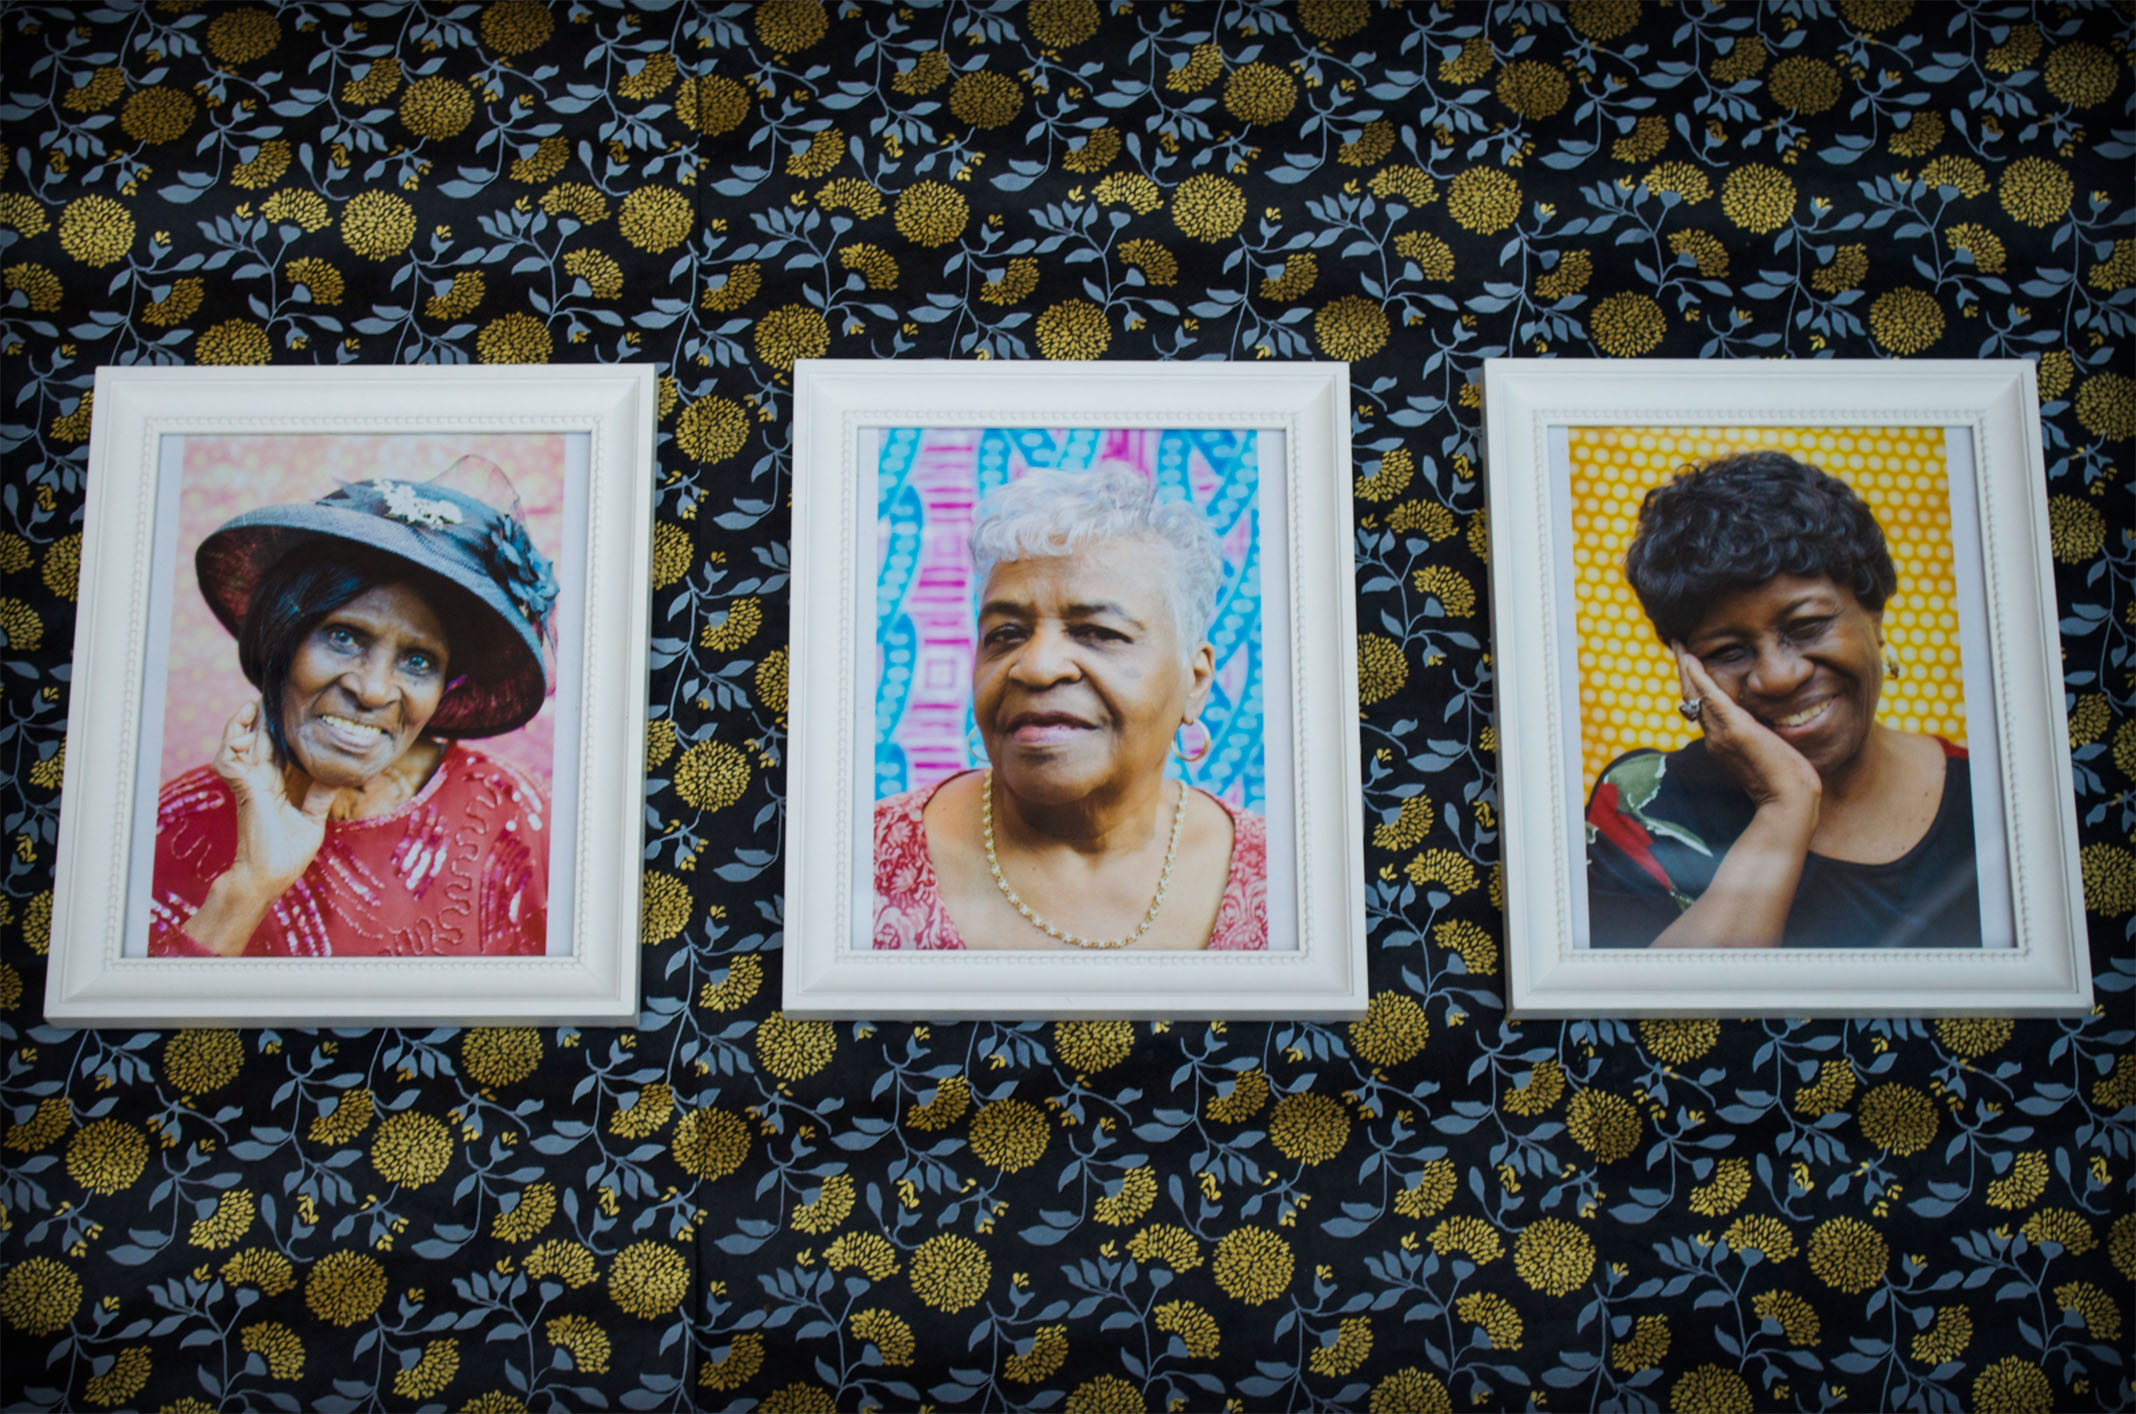 Three framed portraits of Black elderly women. They are each dressed elegantly and smiling against colorful patterned backgrounds. The framed portraits are sitting on a black, blue, and gold floral background.